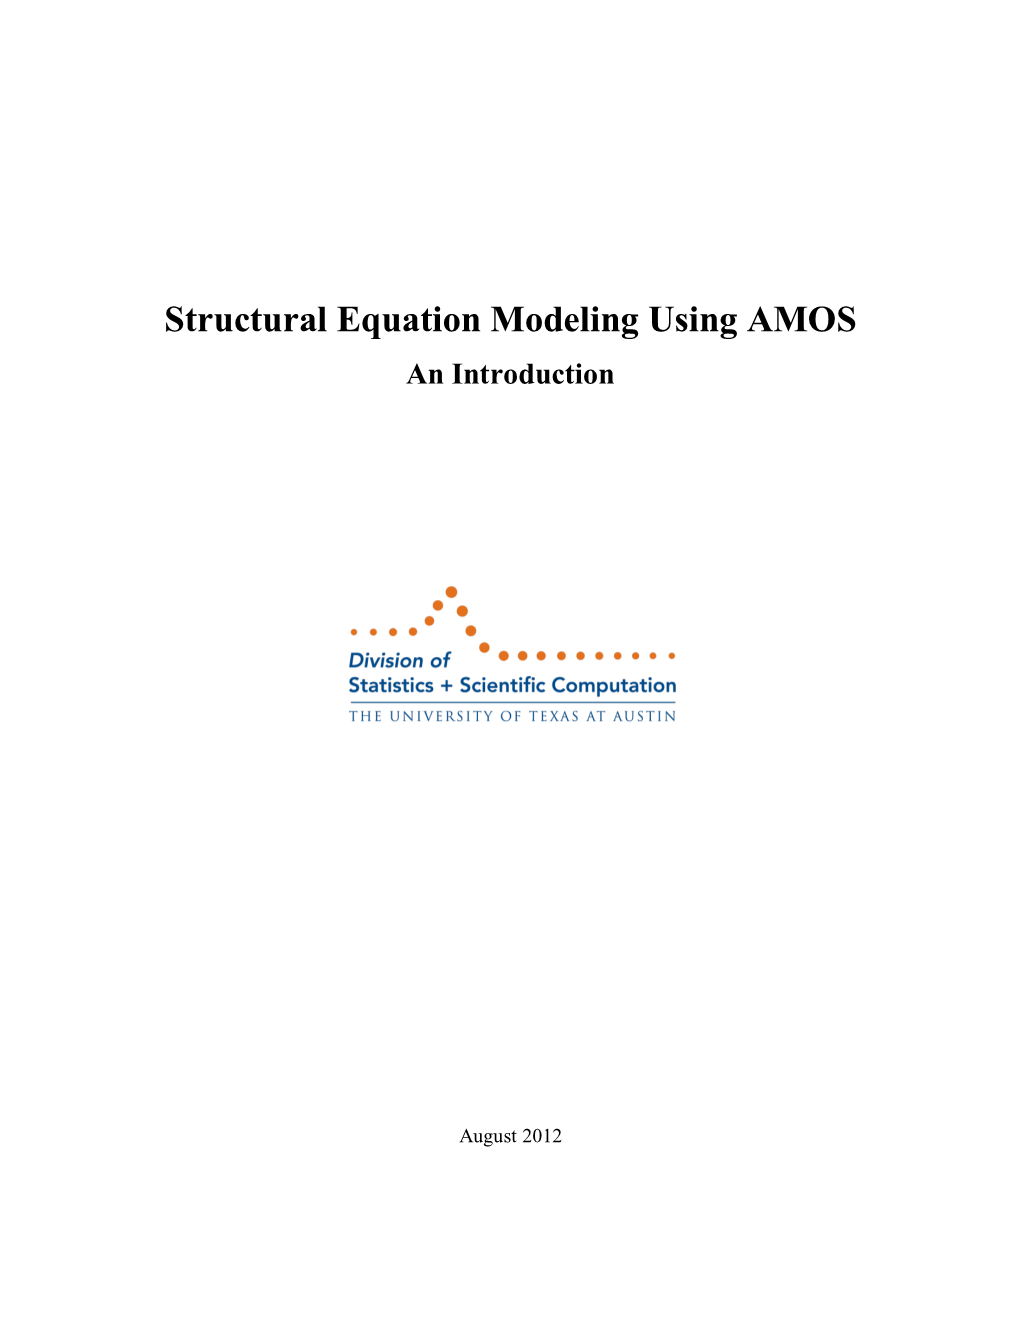 Structural Equation Modeling Using AMOS an Introduction